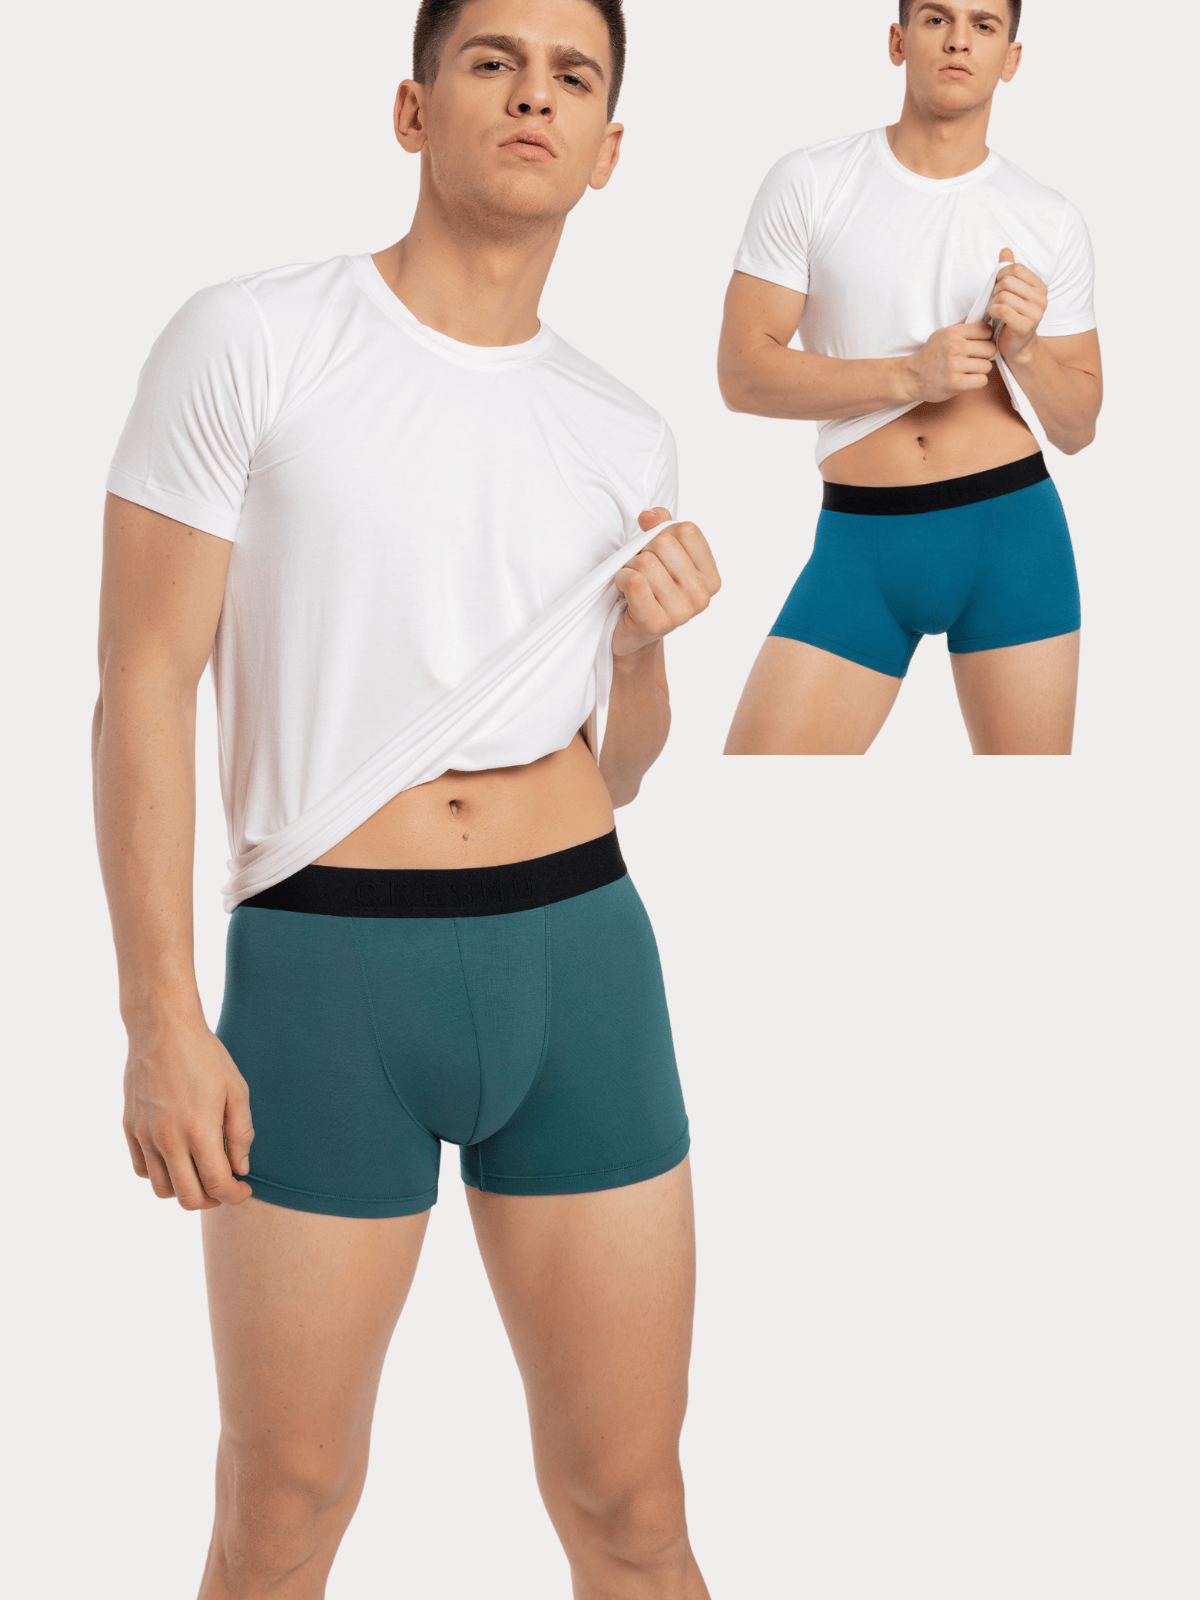 CRESMO Men's Anti-Microbial Micro Modal Underwear Breathable Ultra Soft Trunk (Pack Of 2)